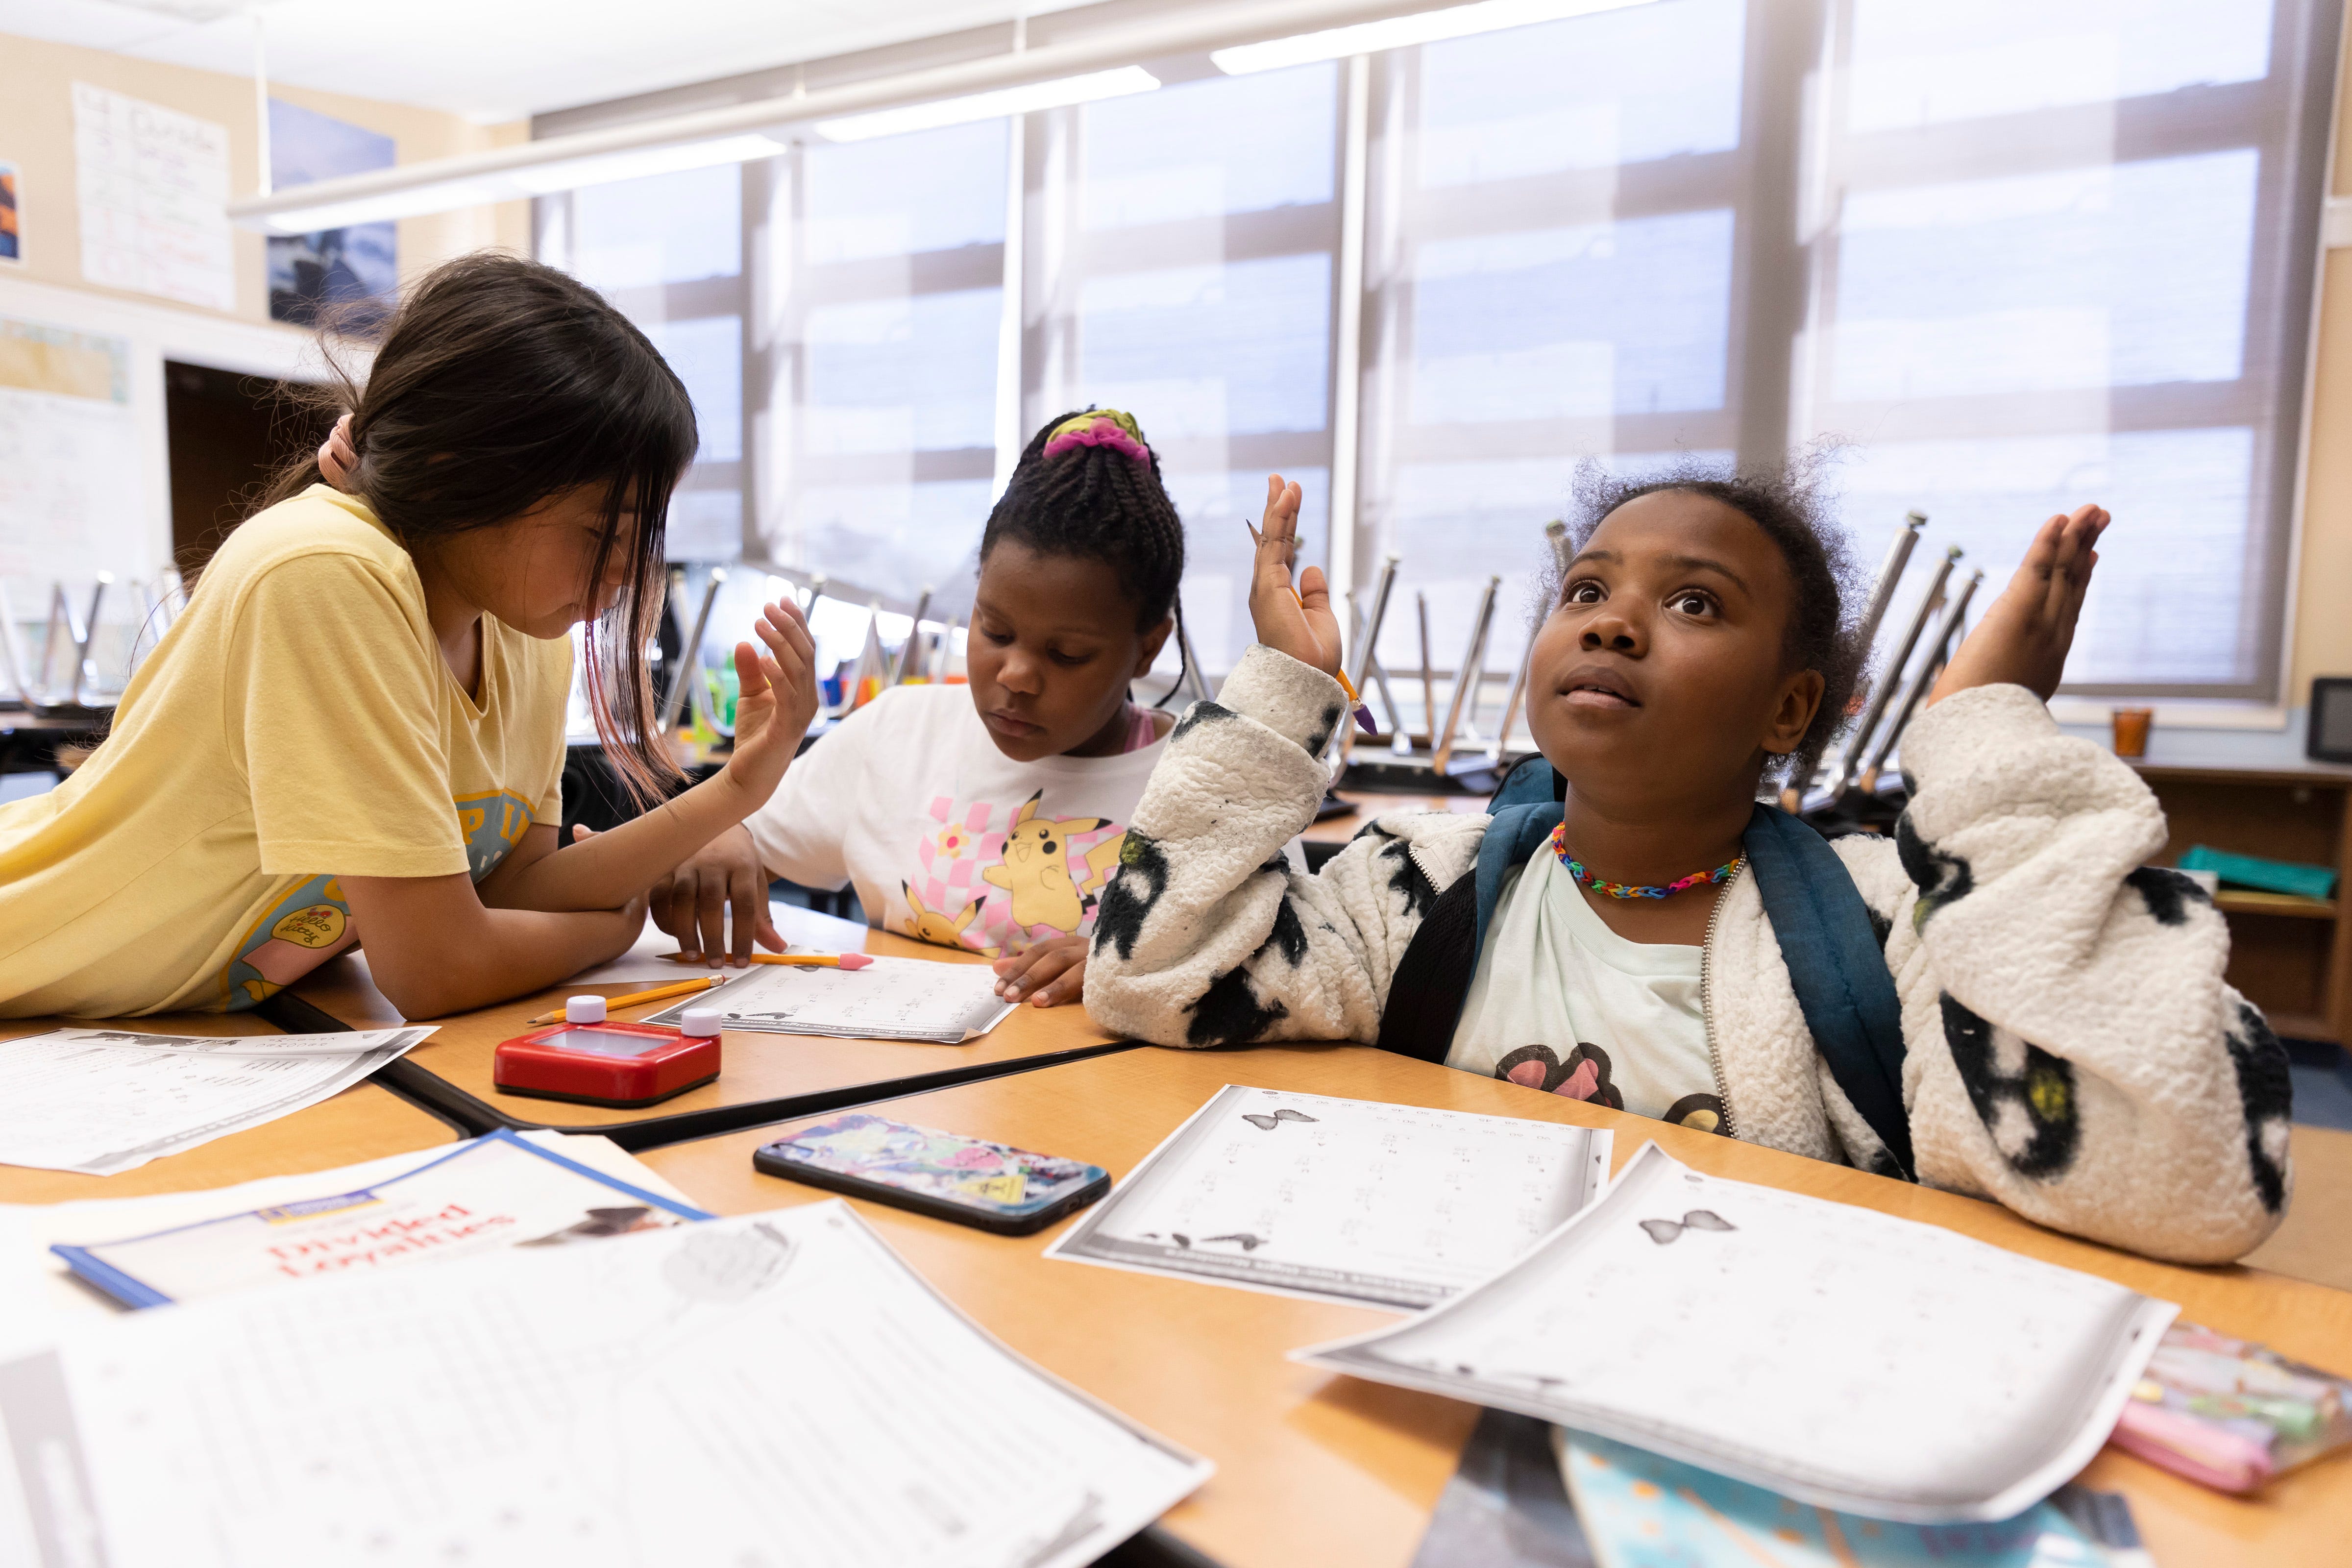 Jada Alexander looks up in frustration while working on math problems with her classmates, Cashmere Barber Jones and Kimberly Aguilar, during their after school program at Nystrom Elementary in  Richmond, Calif.